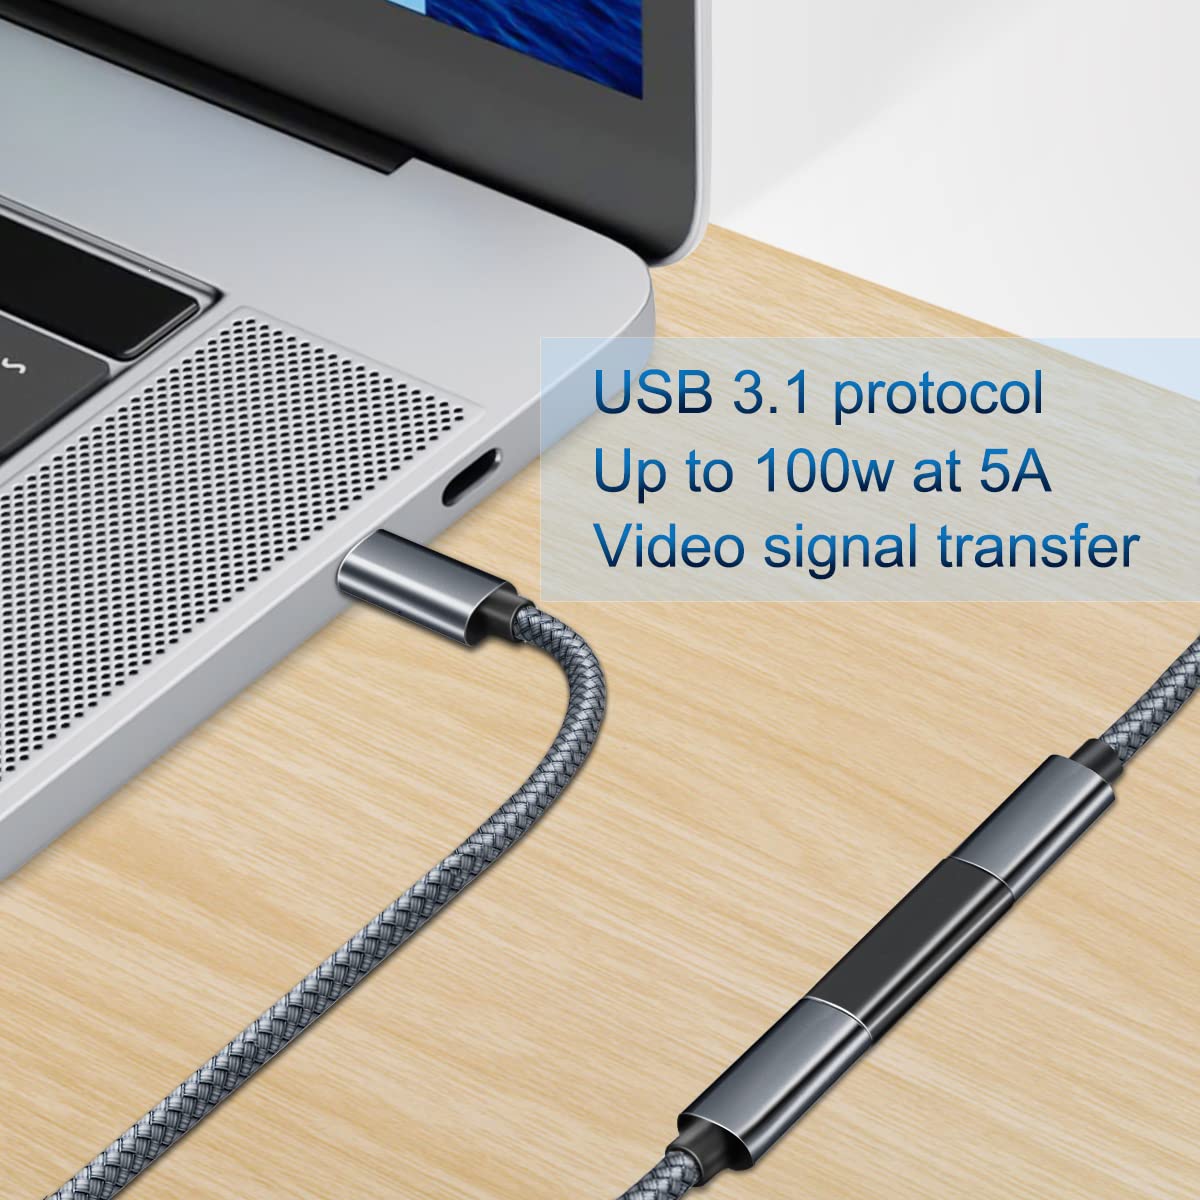 Basesailor USB C Female to Female Adapter 3-Pack,USBC 3.1 10GBps 100W PD Coupler for Connecting Two Type C Cable,Thunderbolt 3 Compatible Extension Connector for USB-C Devices